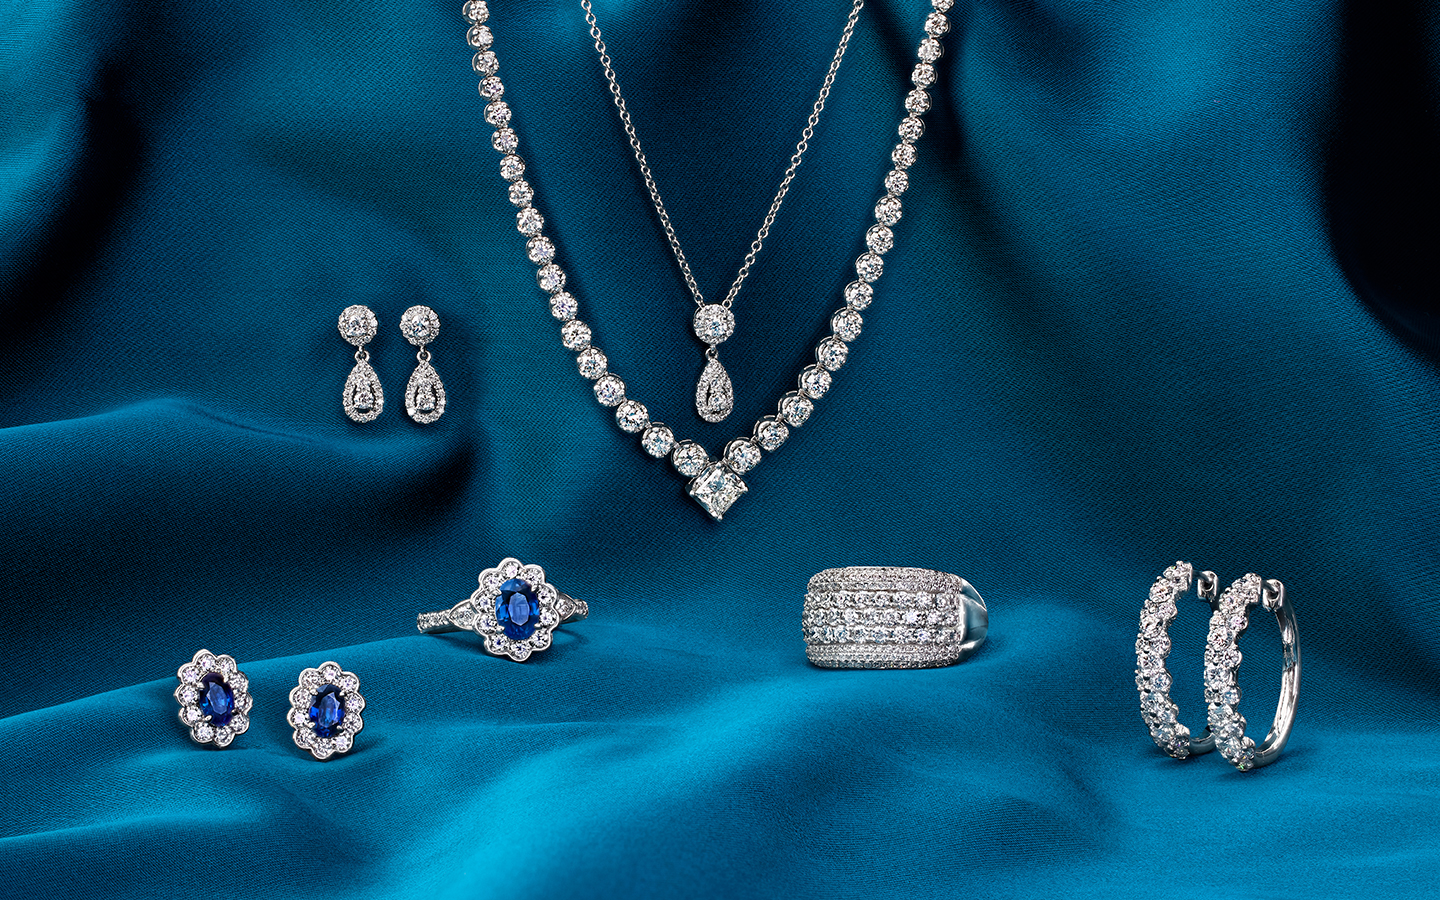 Timeless jewelry with diamond necklaces, earrings and sapphire rings.